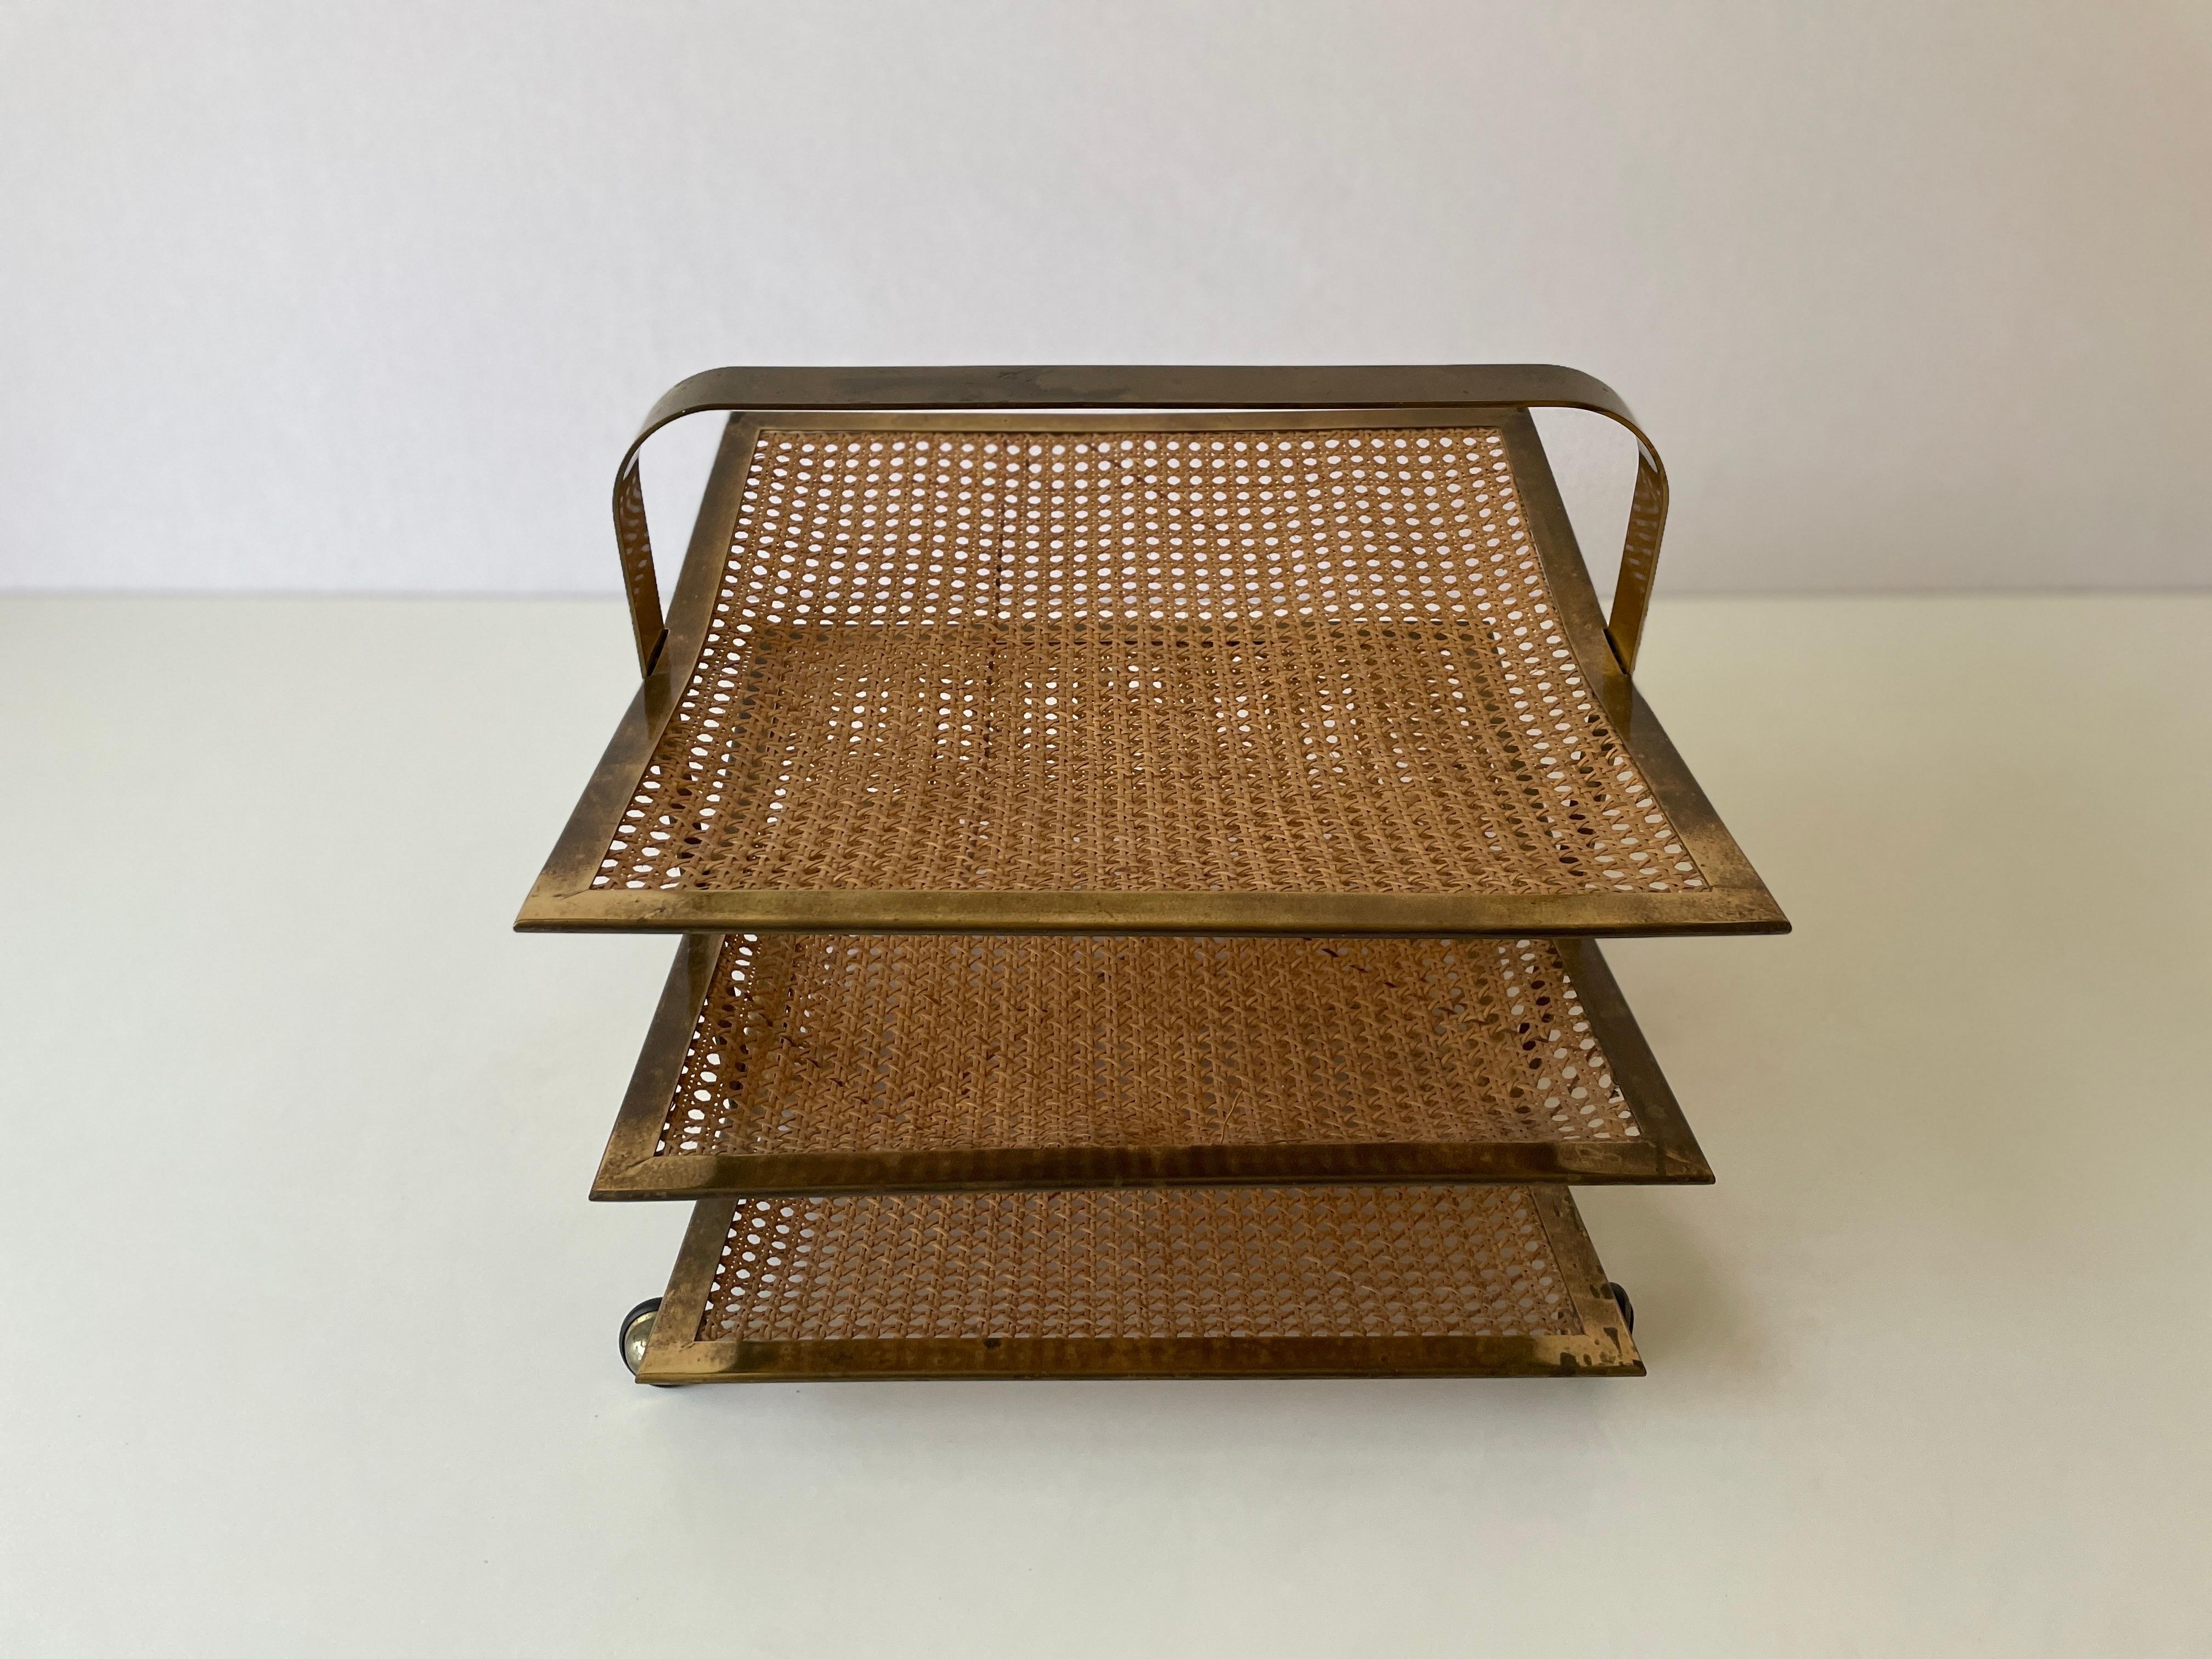 Mid-century Modern Wicker - Brass Wonderful Luxury Italian Magazine Rack with 3 shelf, 1960s, Italy

Measurtements :

Height: 45 cm
Width: 45 cm
Depth: 45 cm

Please do not hesitate to ask us if you have any questions.